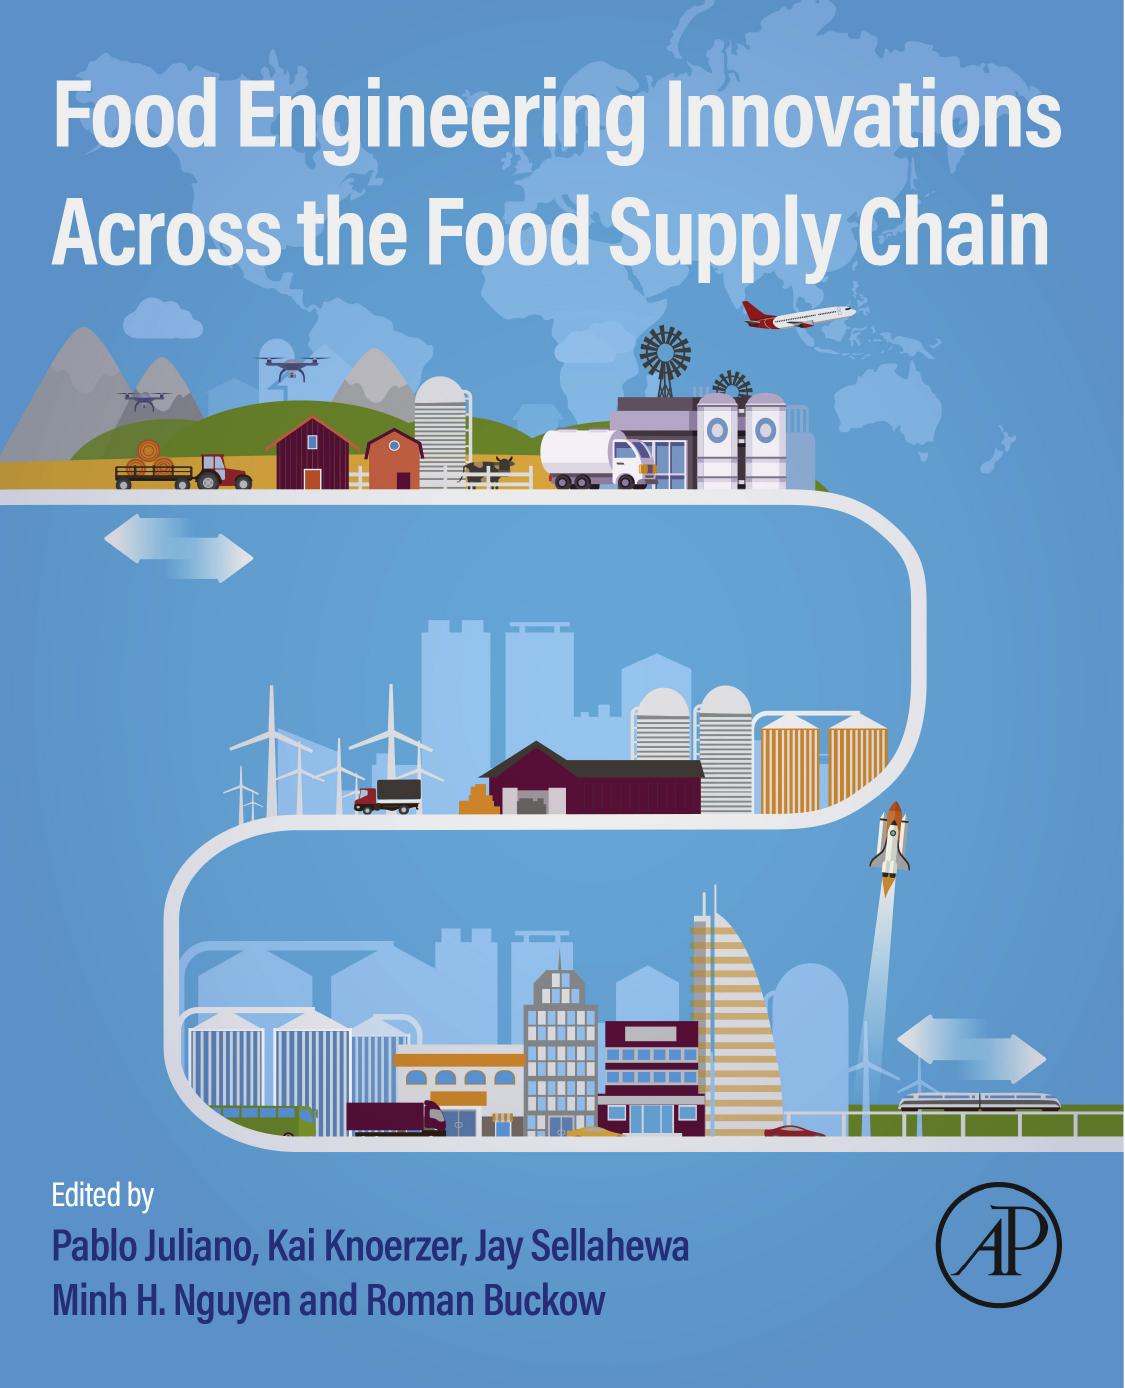 Food Engineering Innovations Across the Food Supply Chain-Academic Press (2021)